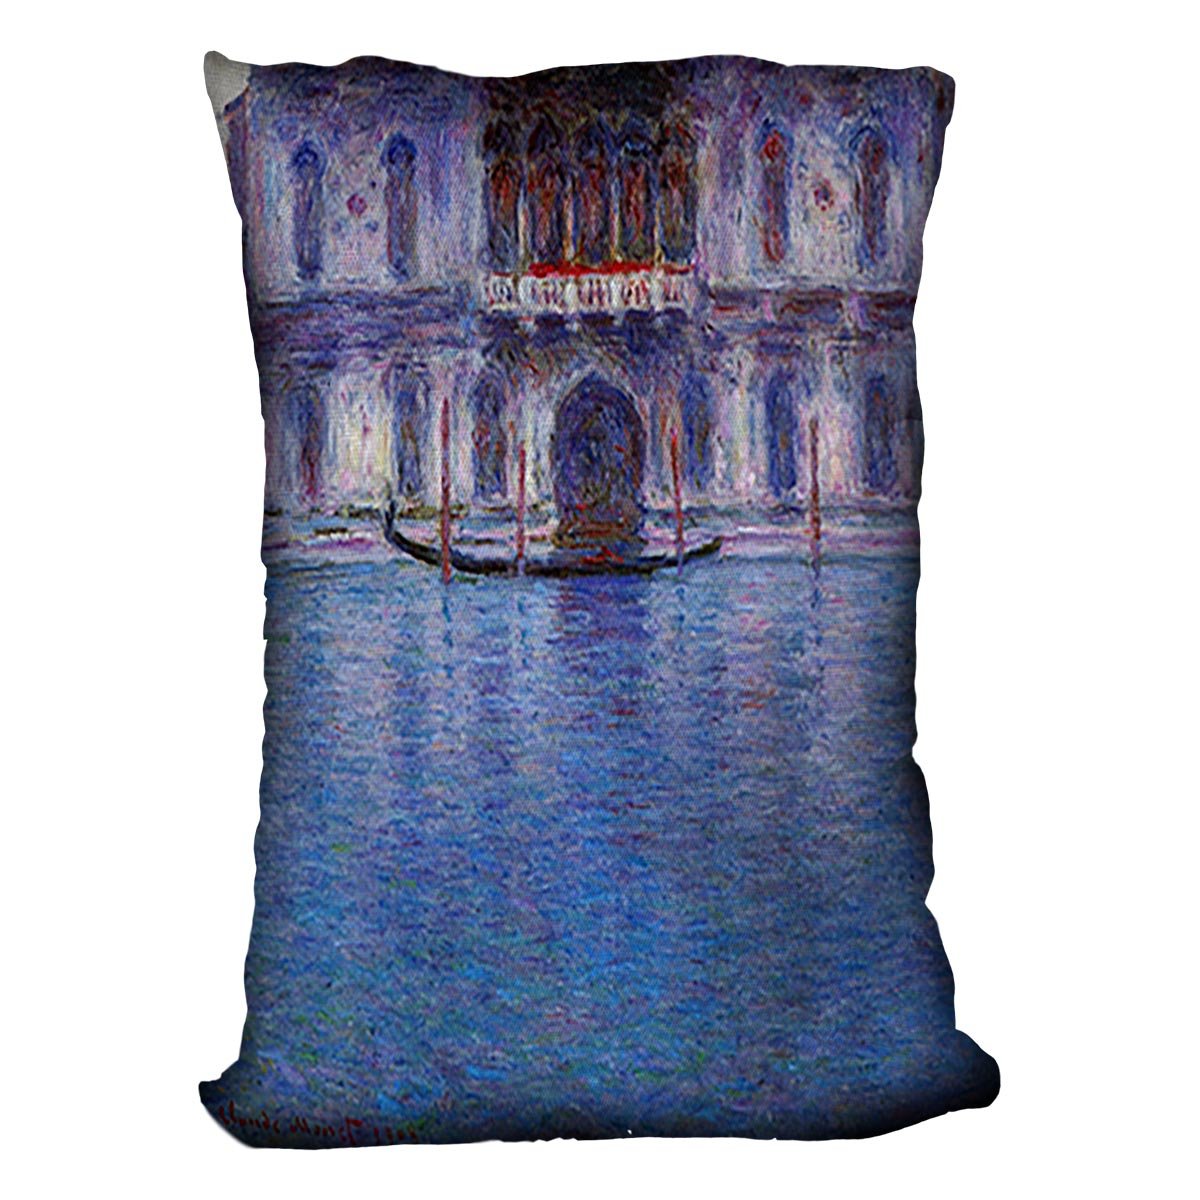 Palazzo 1 by Monet Throw Pillow